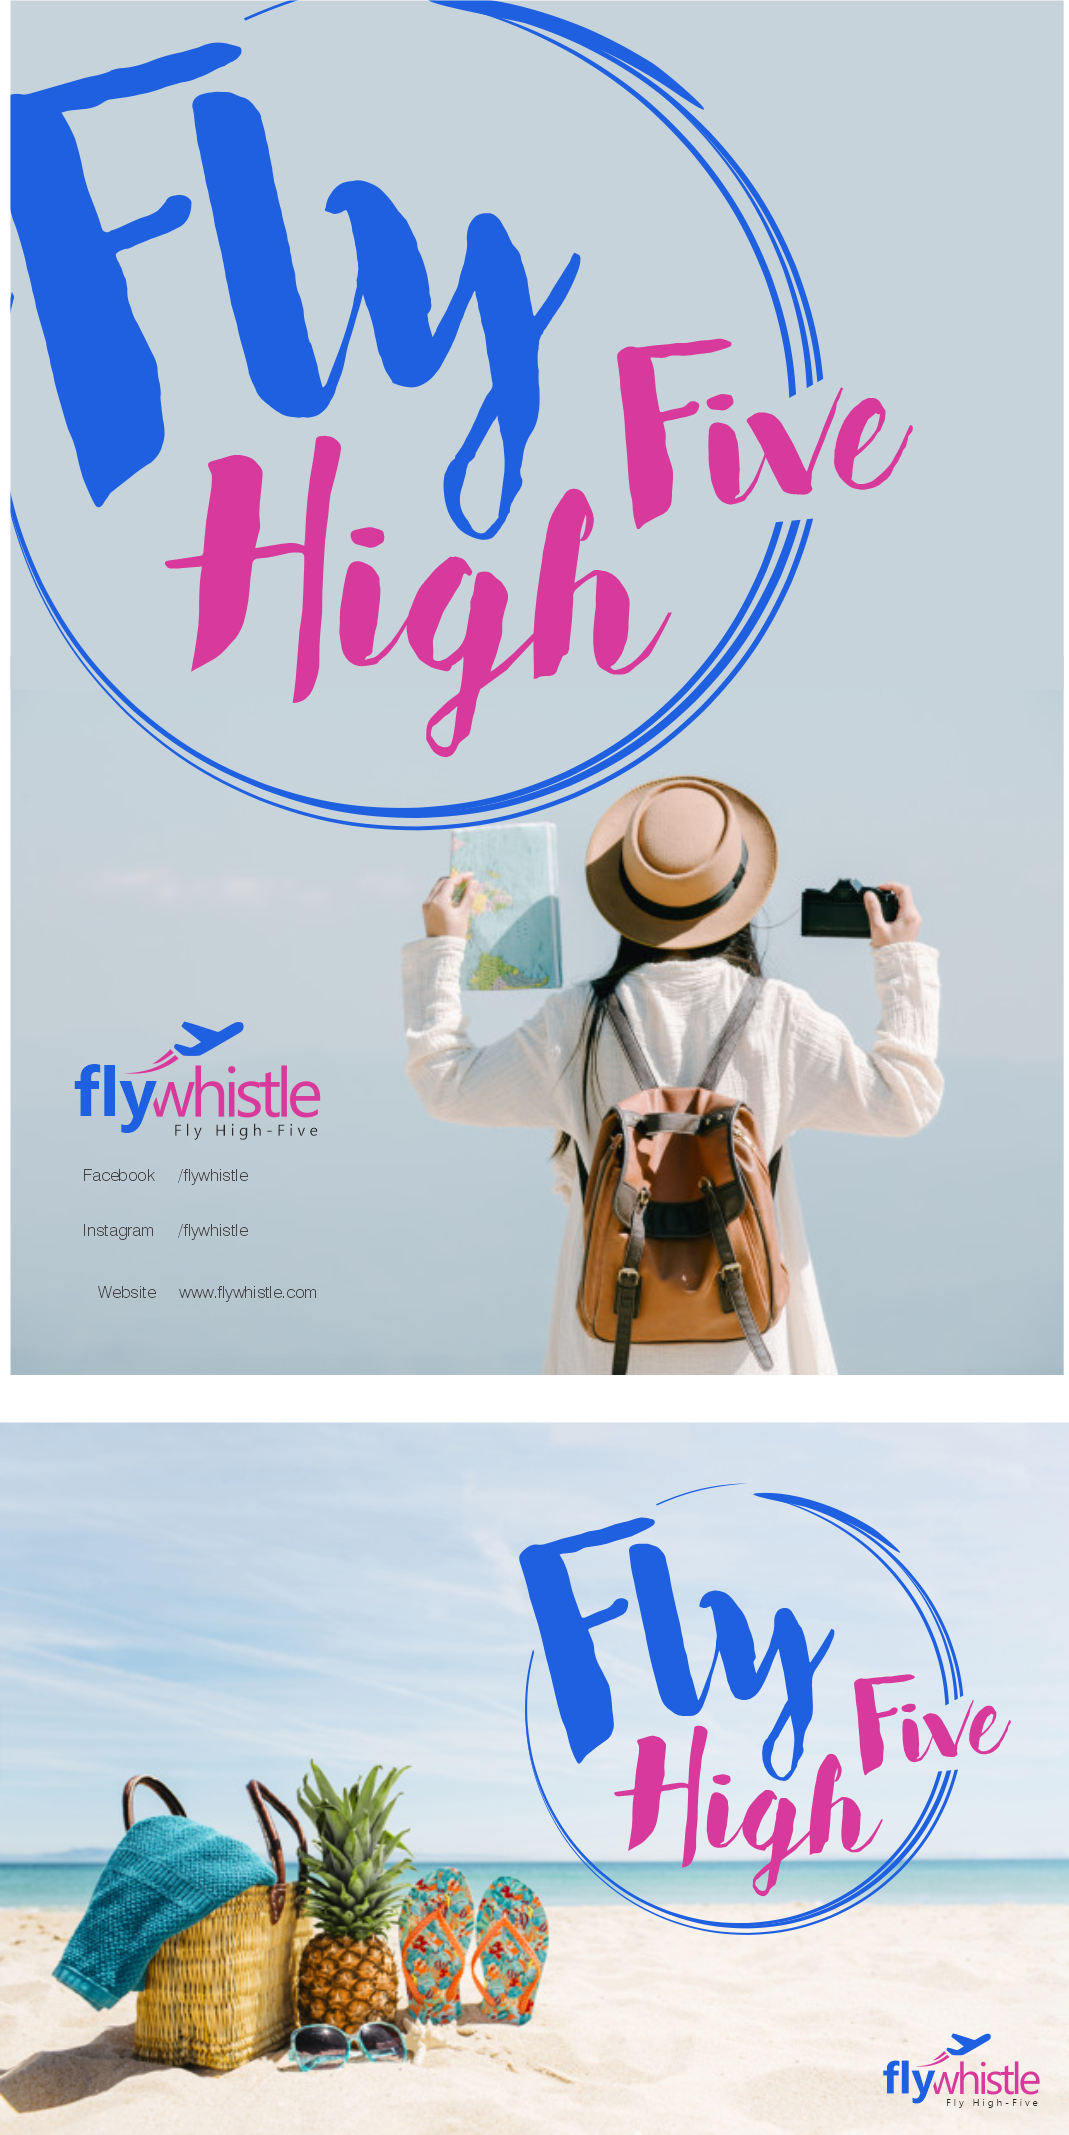 Branding for an Online Travel Agency - flyers & banners